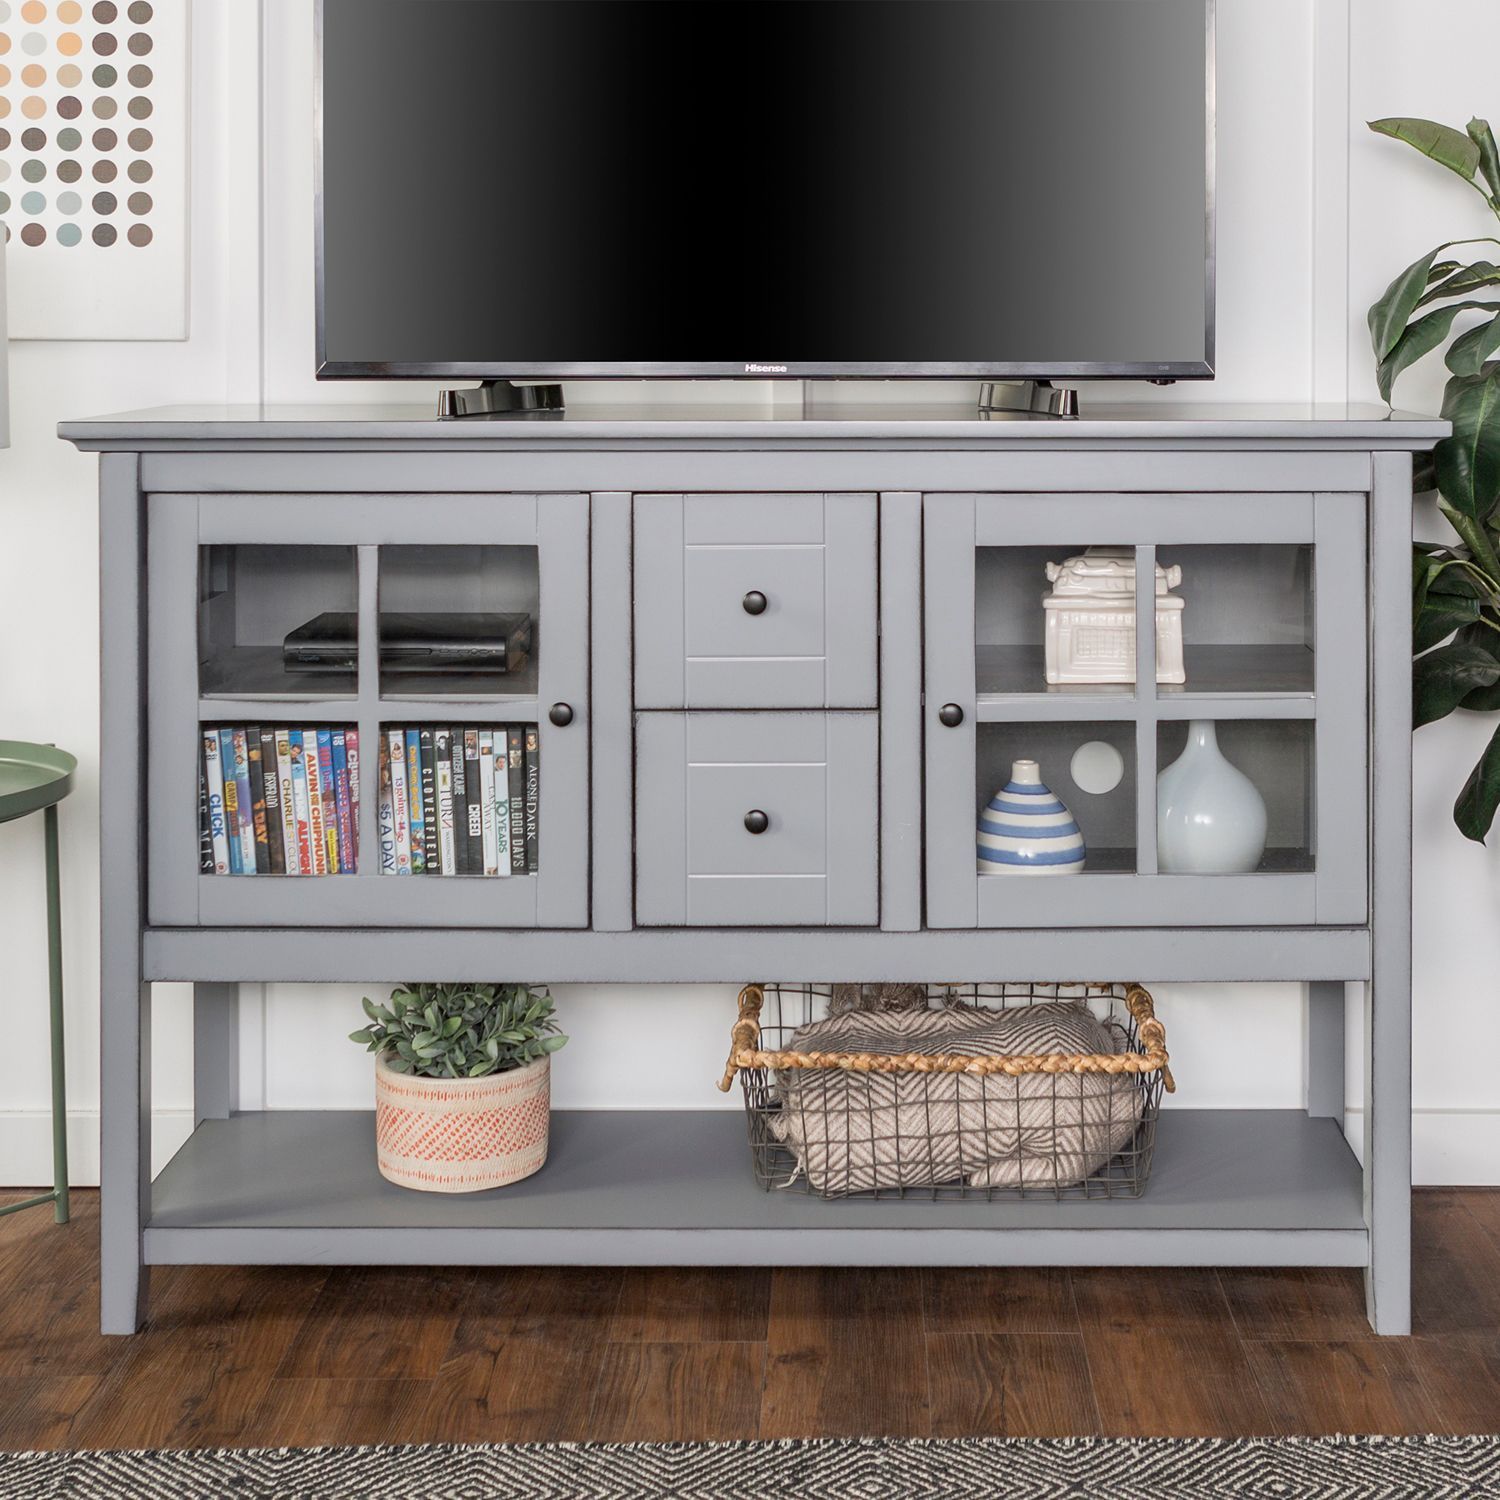 52" Antique Gray Tv Stand & Buffet | Living Room Tv Stand Inside Tv Stands With Table Storage Cabinet In Rustic Gray Wash (View 4 of 15)